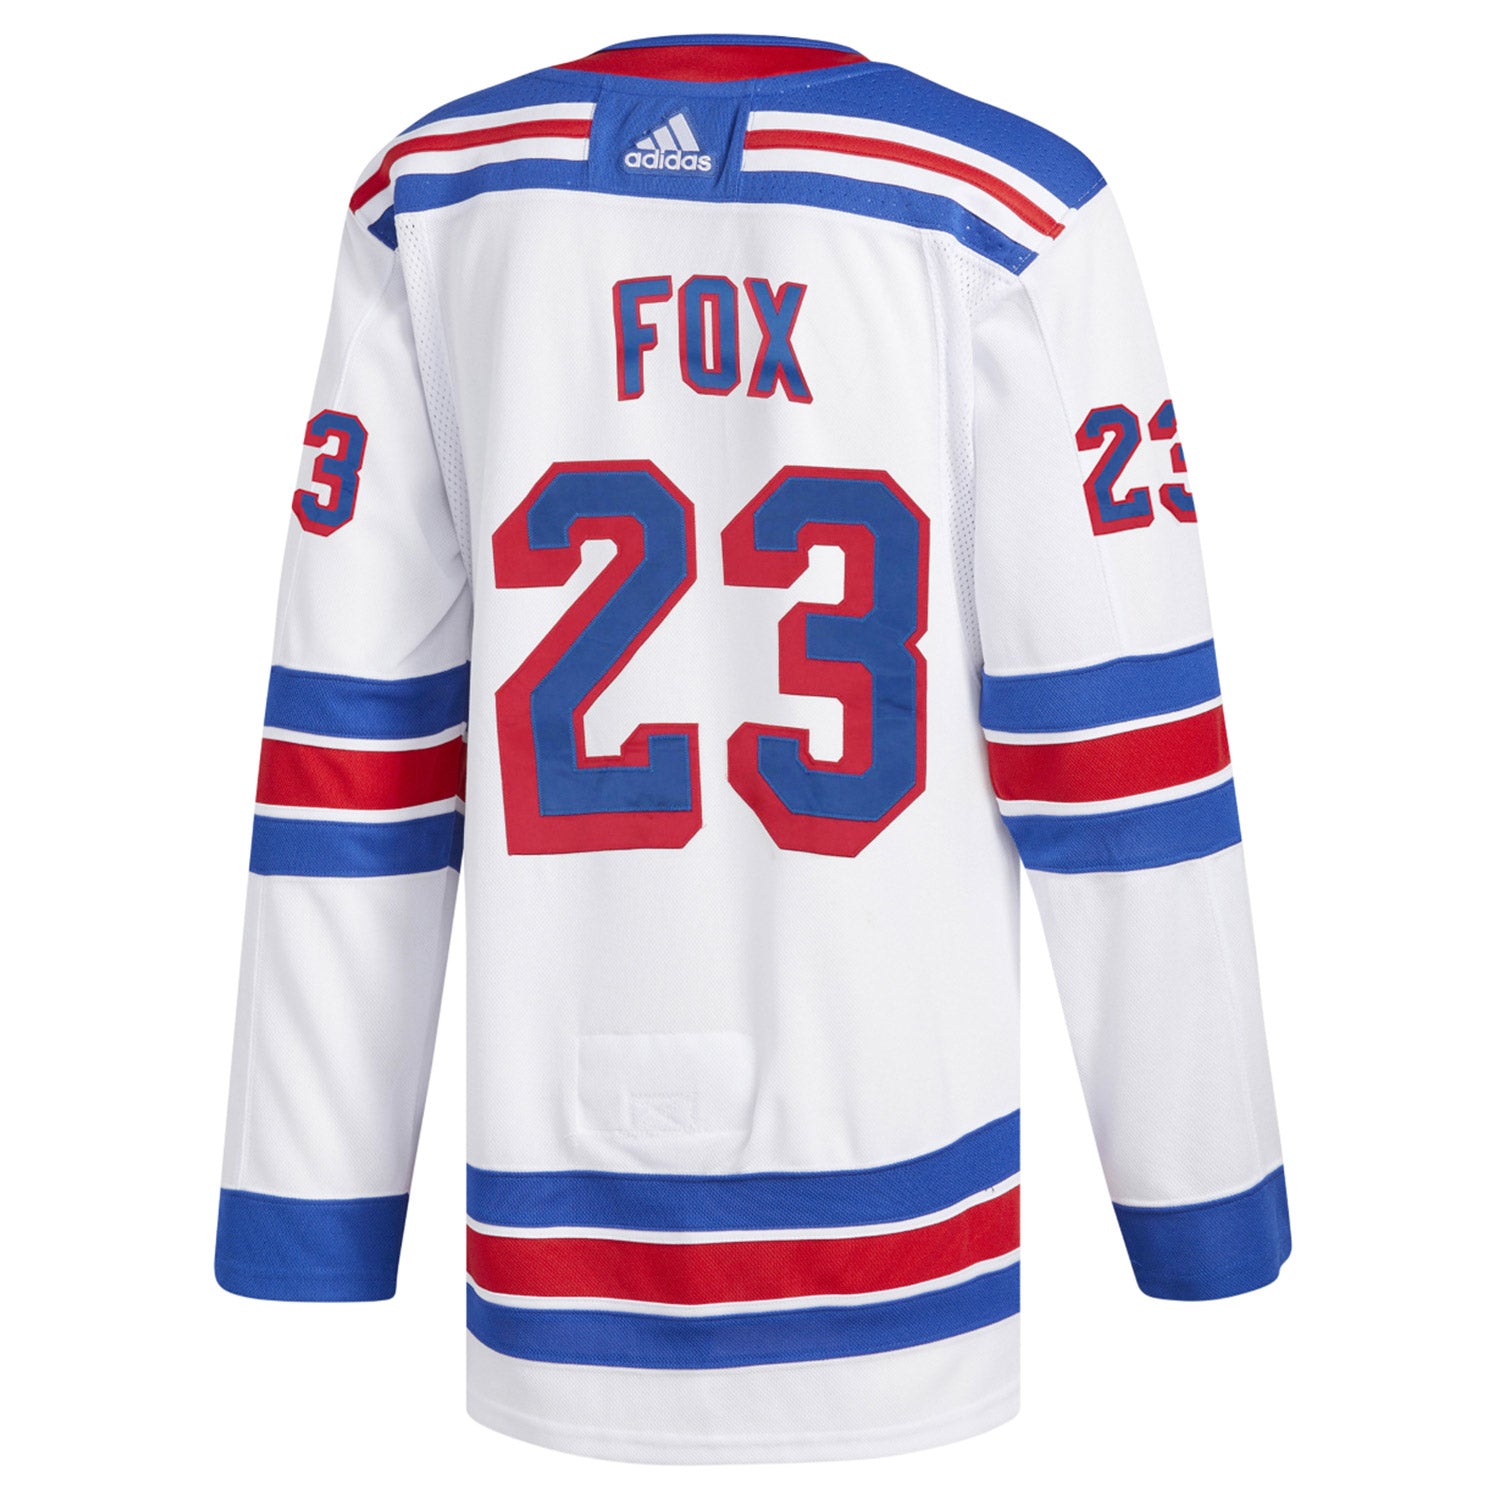 Adam Fox Adidas Authentic Road Jersey In White - Back View